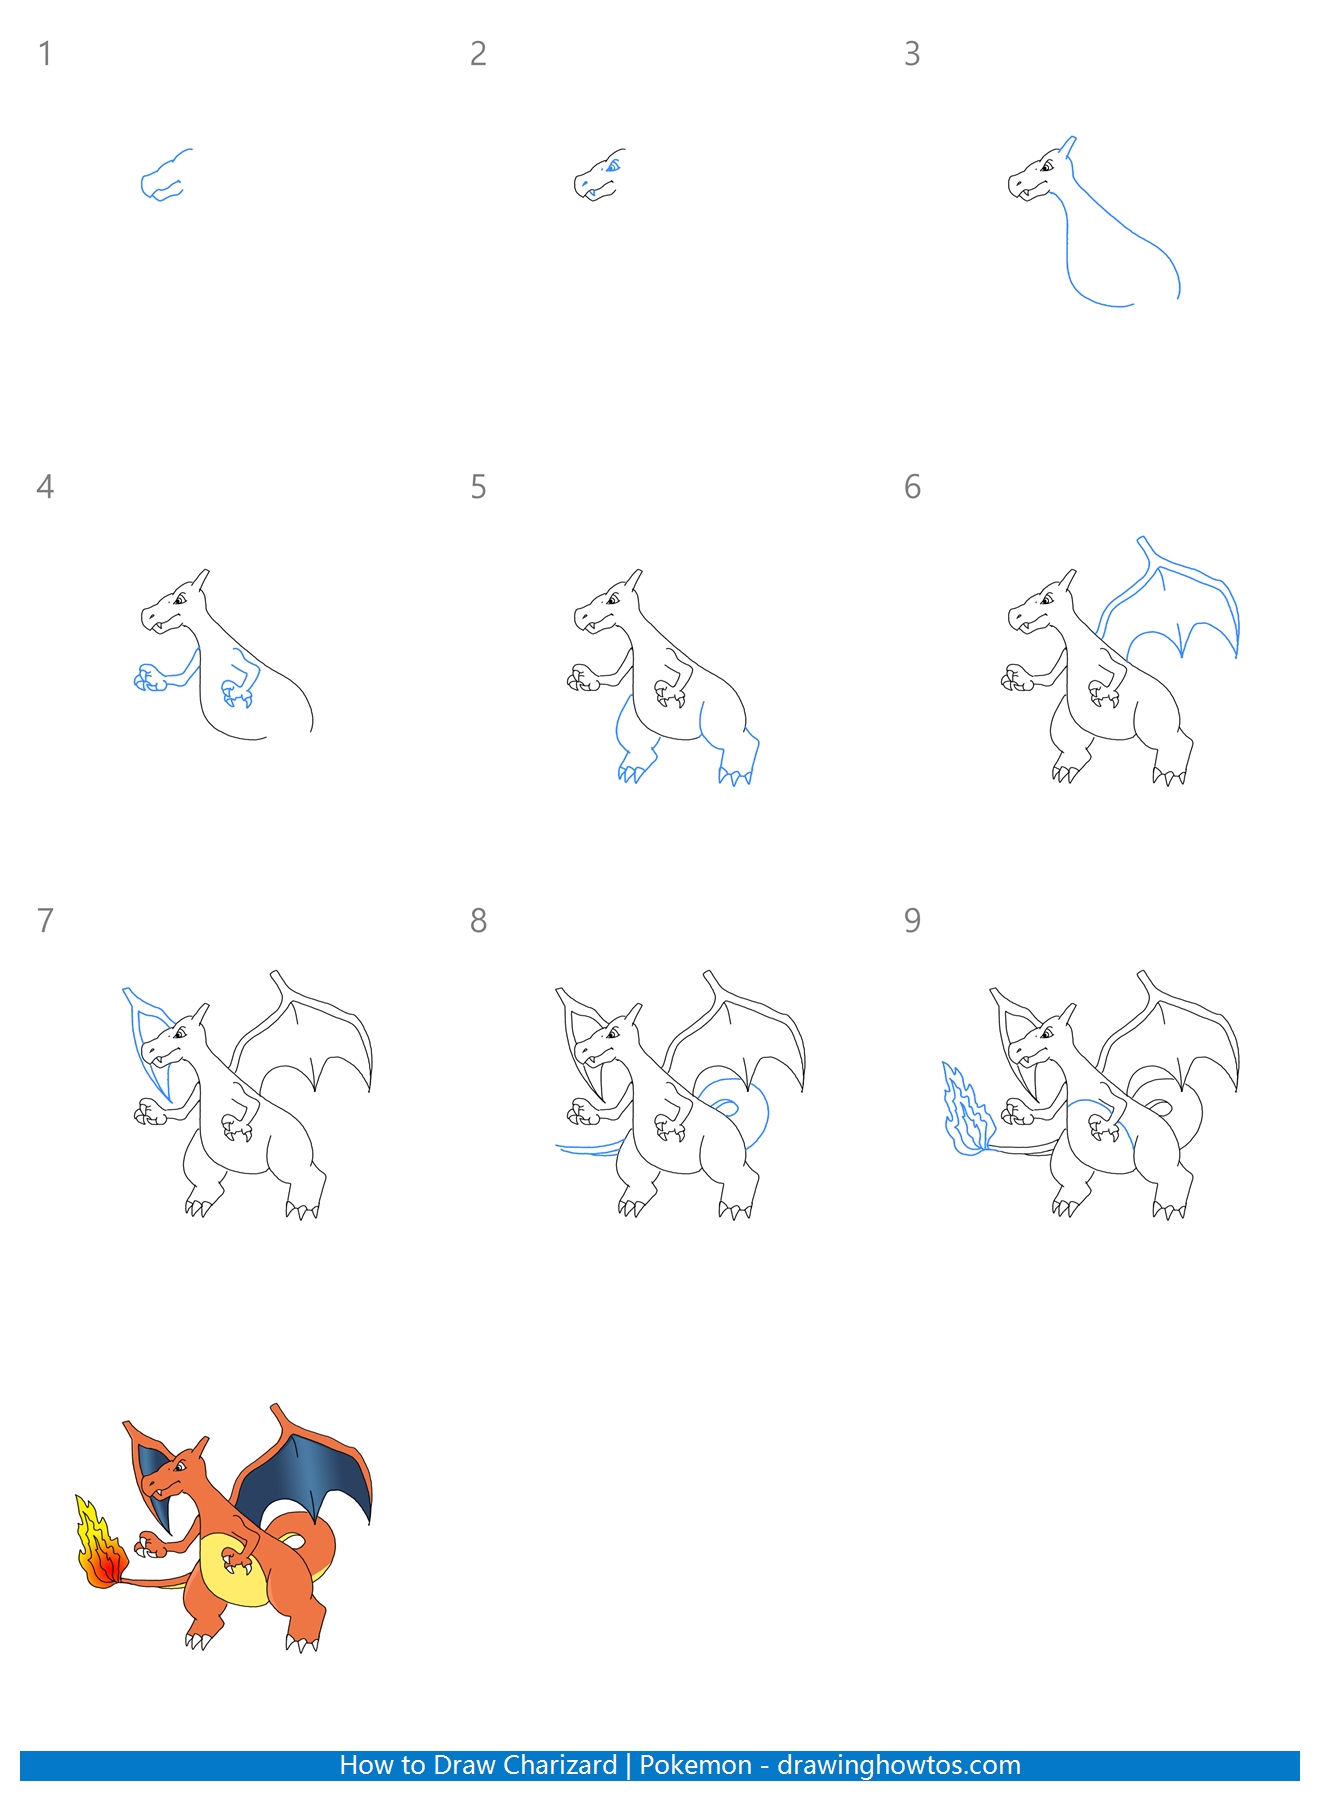 How to Draw Charizard Step by Step